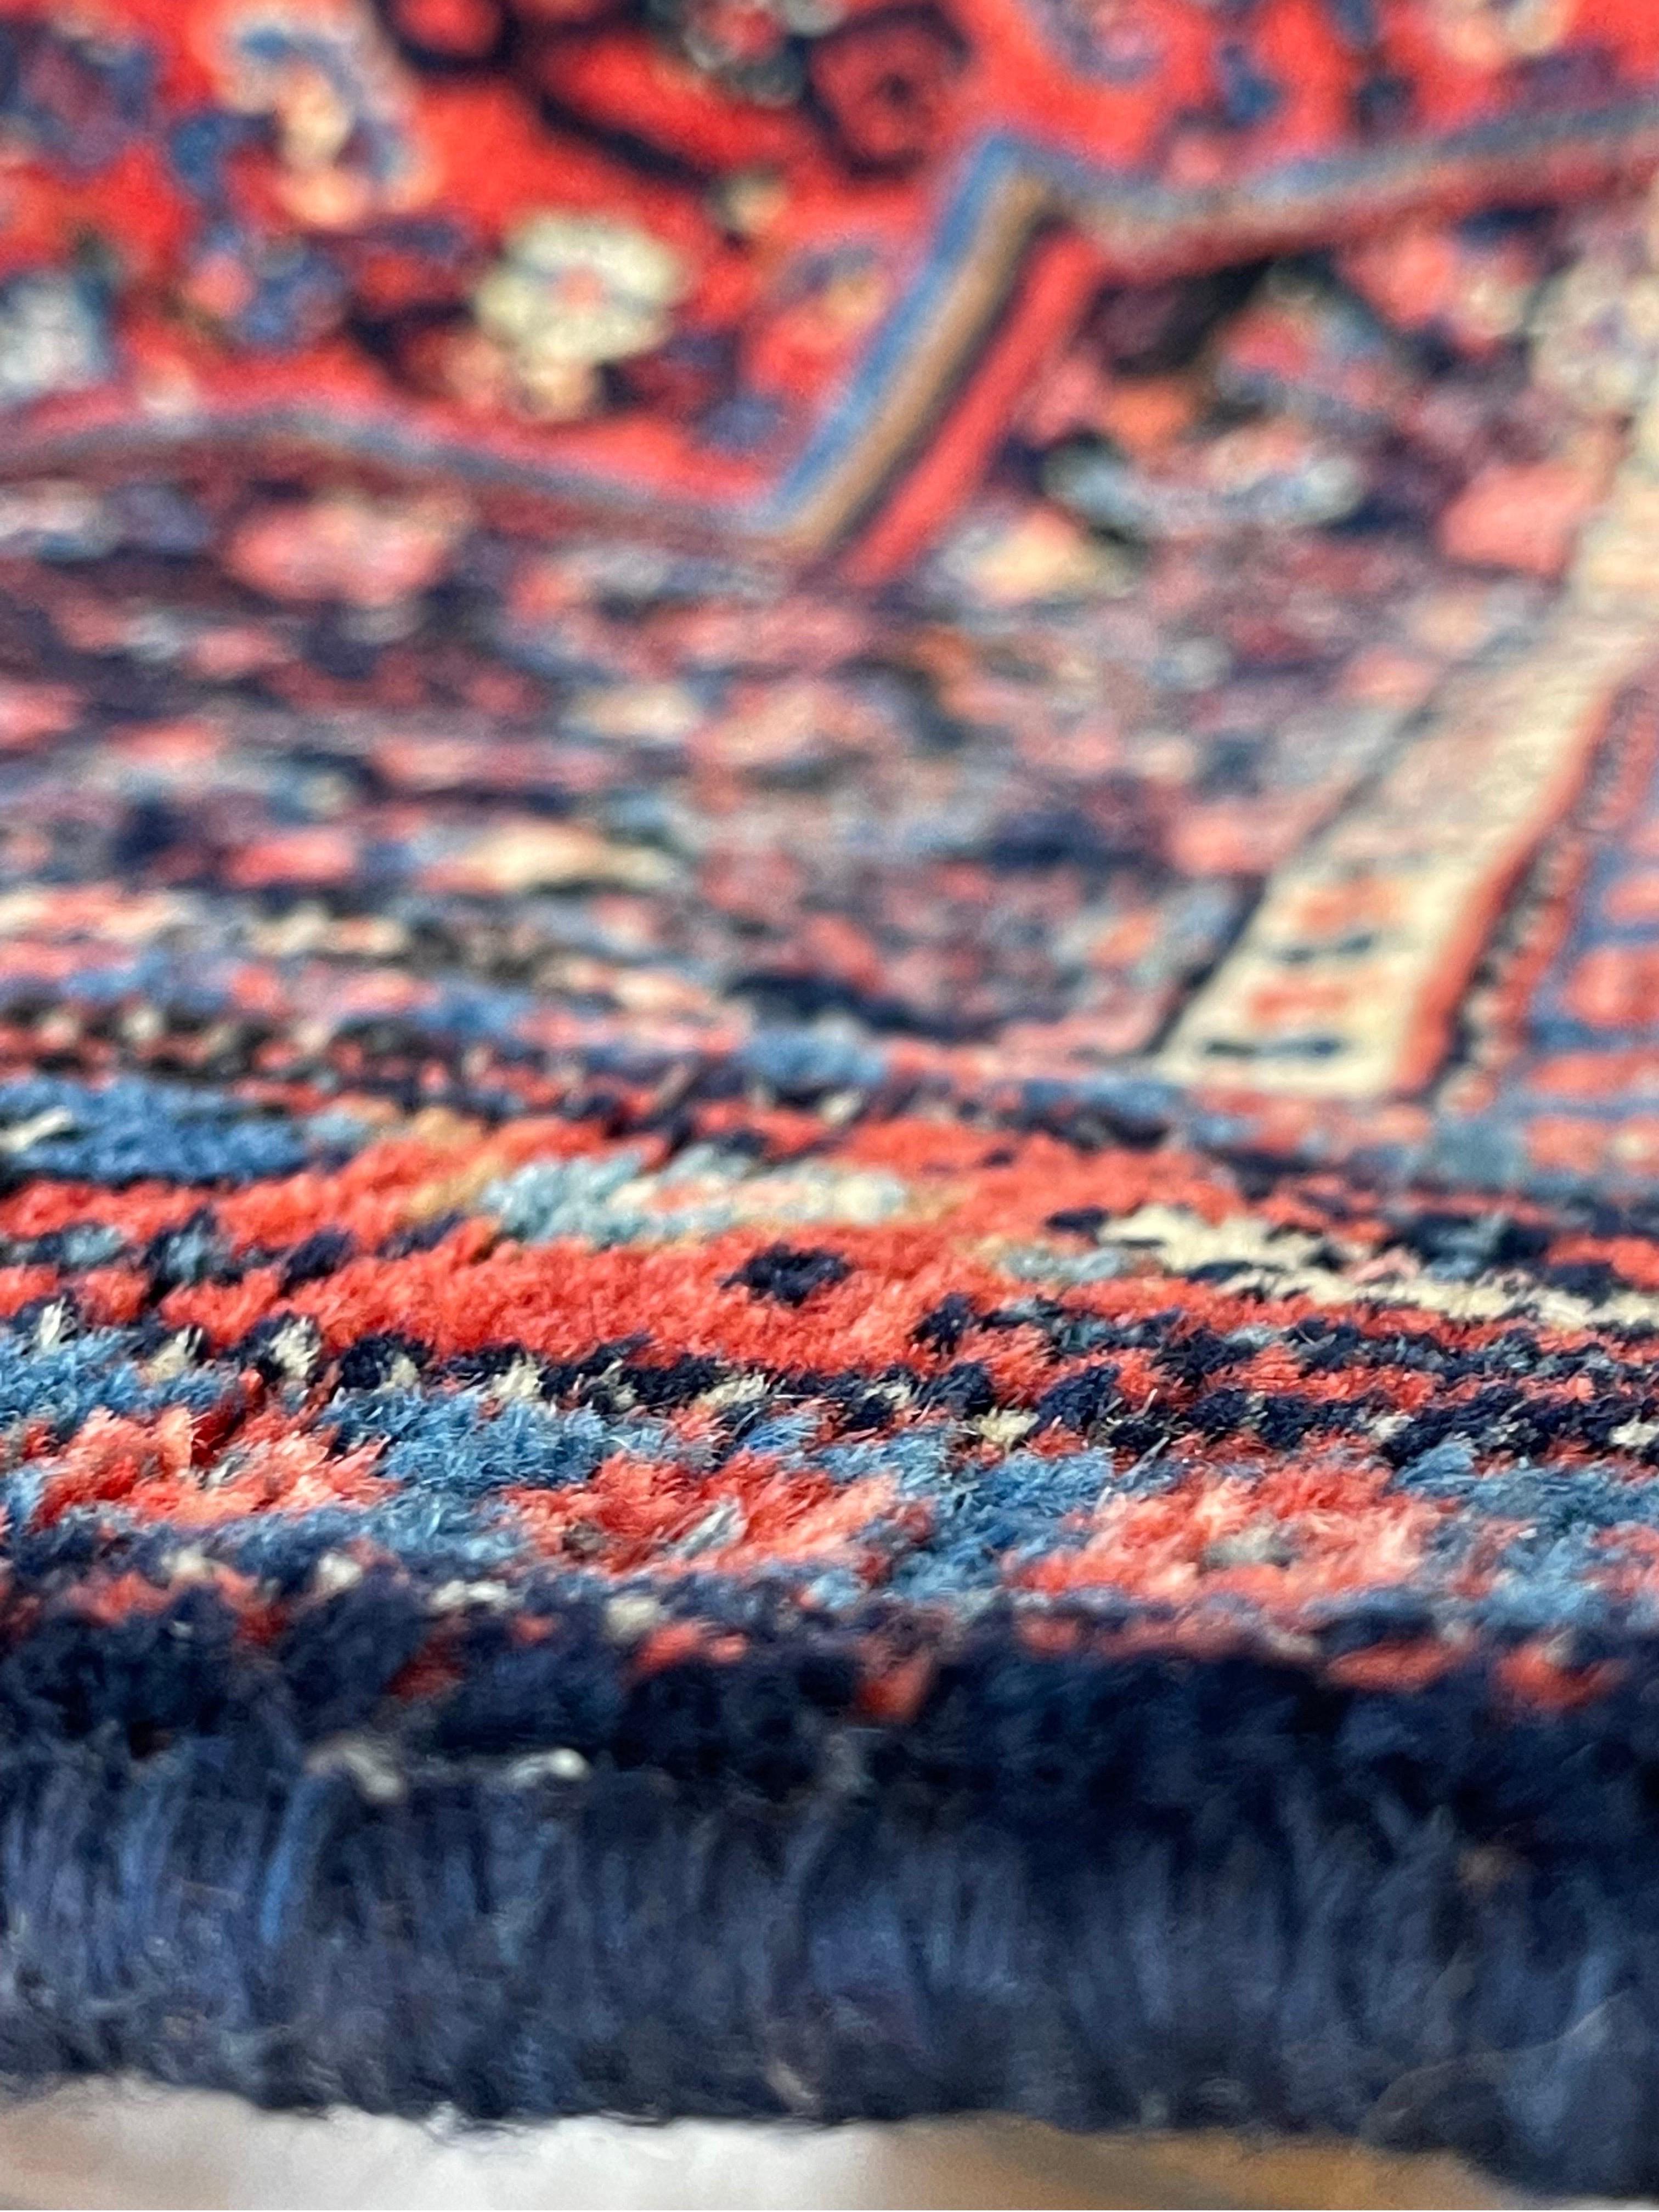 Handwoven in the town of Senneh, center of Kurdistan this rug is a fine example of Krudish weaving. The town Senneh was one of the most famous carpet-making center in the world in the 10th and early 20th century. The knots are Turkish and the